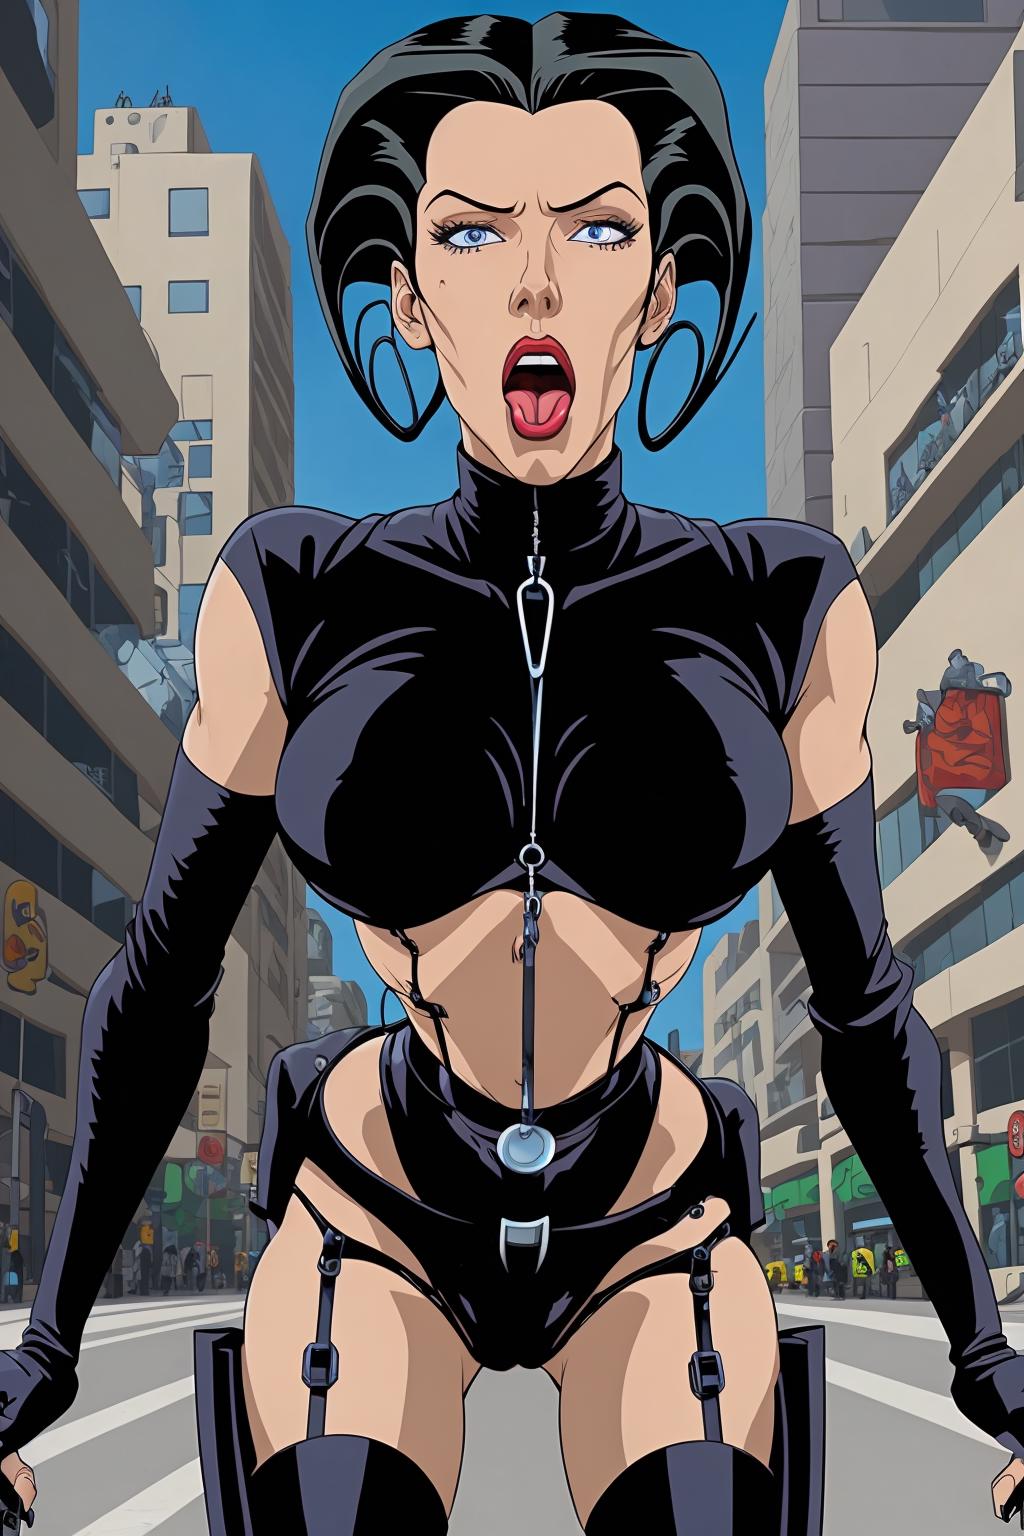 Aeon Flux image by Photographer